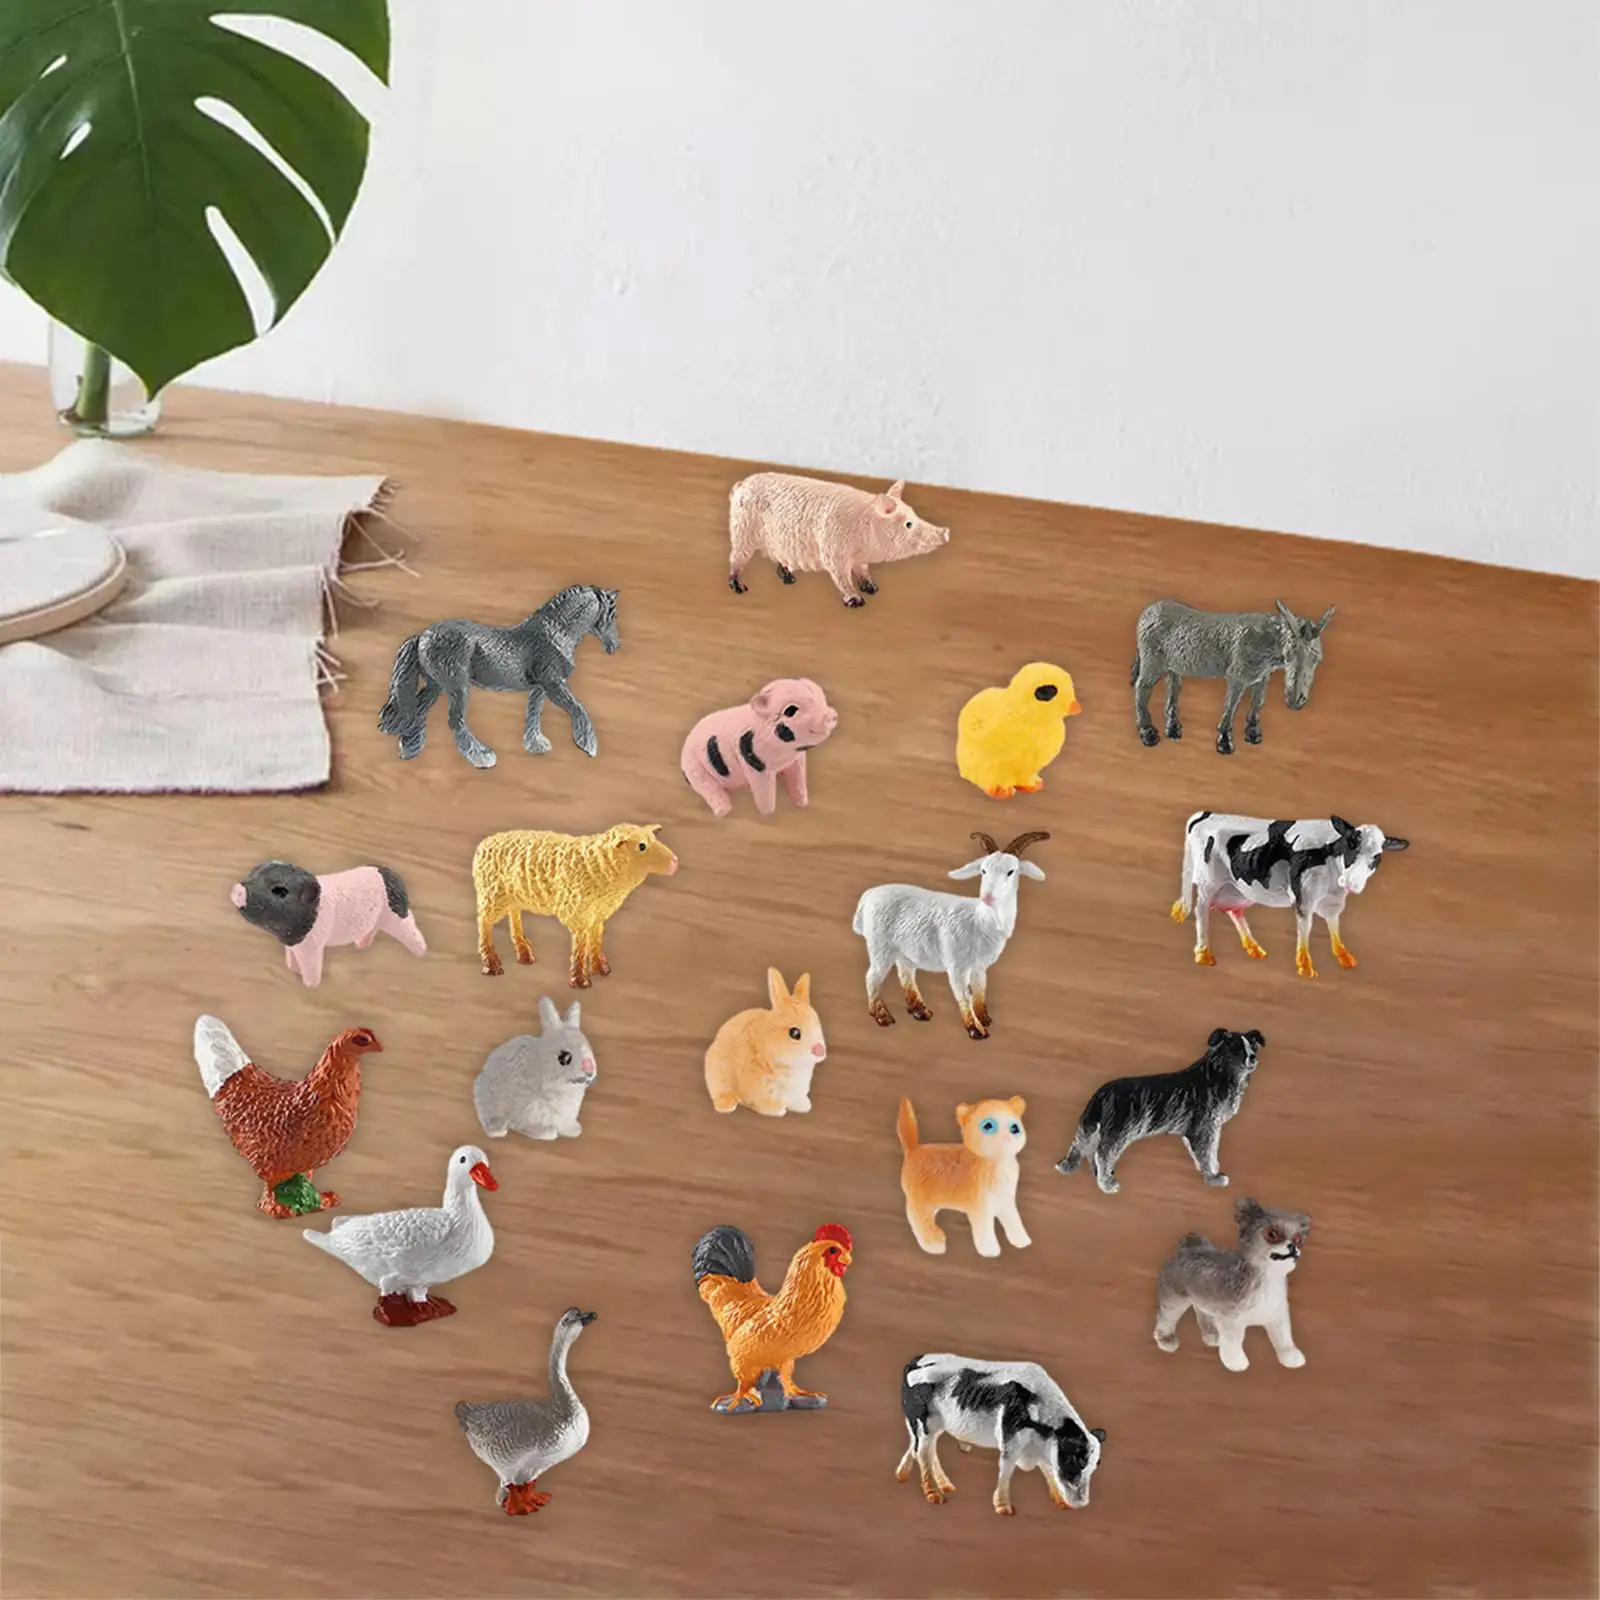 19 Pieces Farm Animal Model Set Dog Horse Chicken for Educational Learning Toys